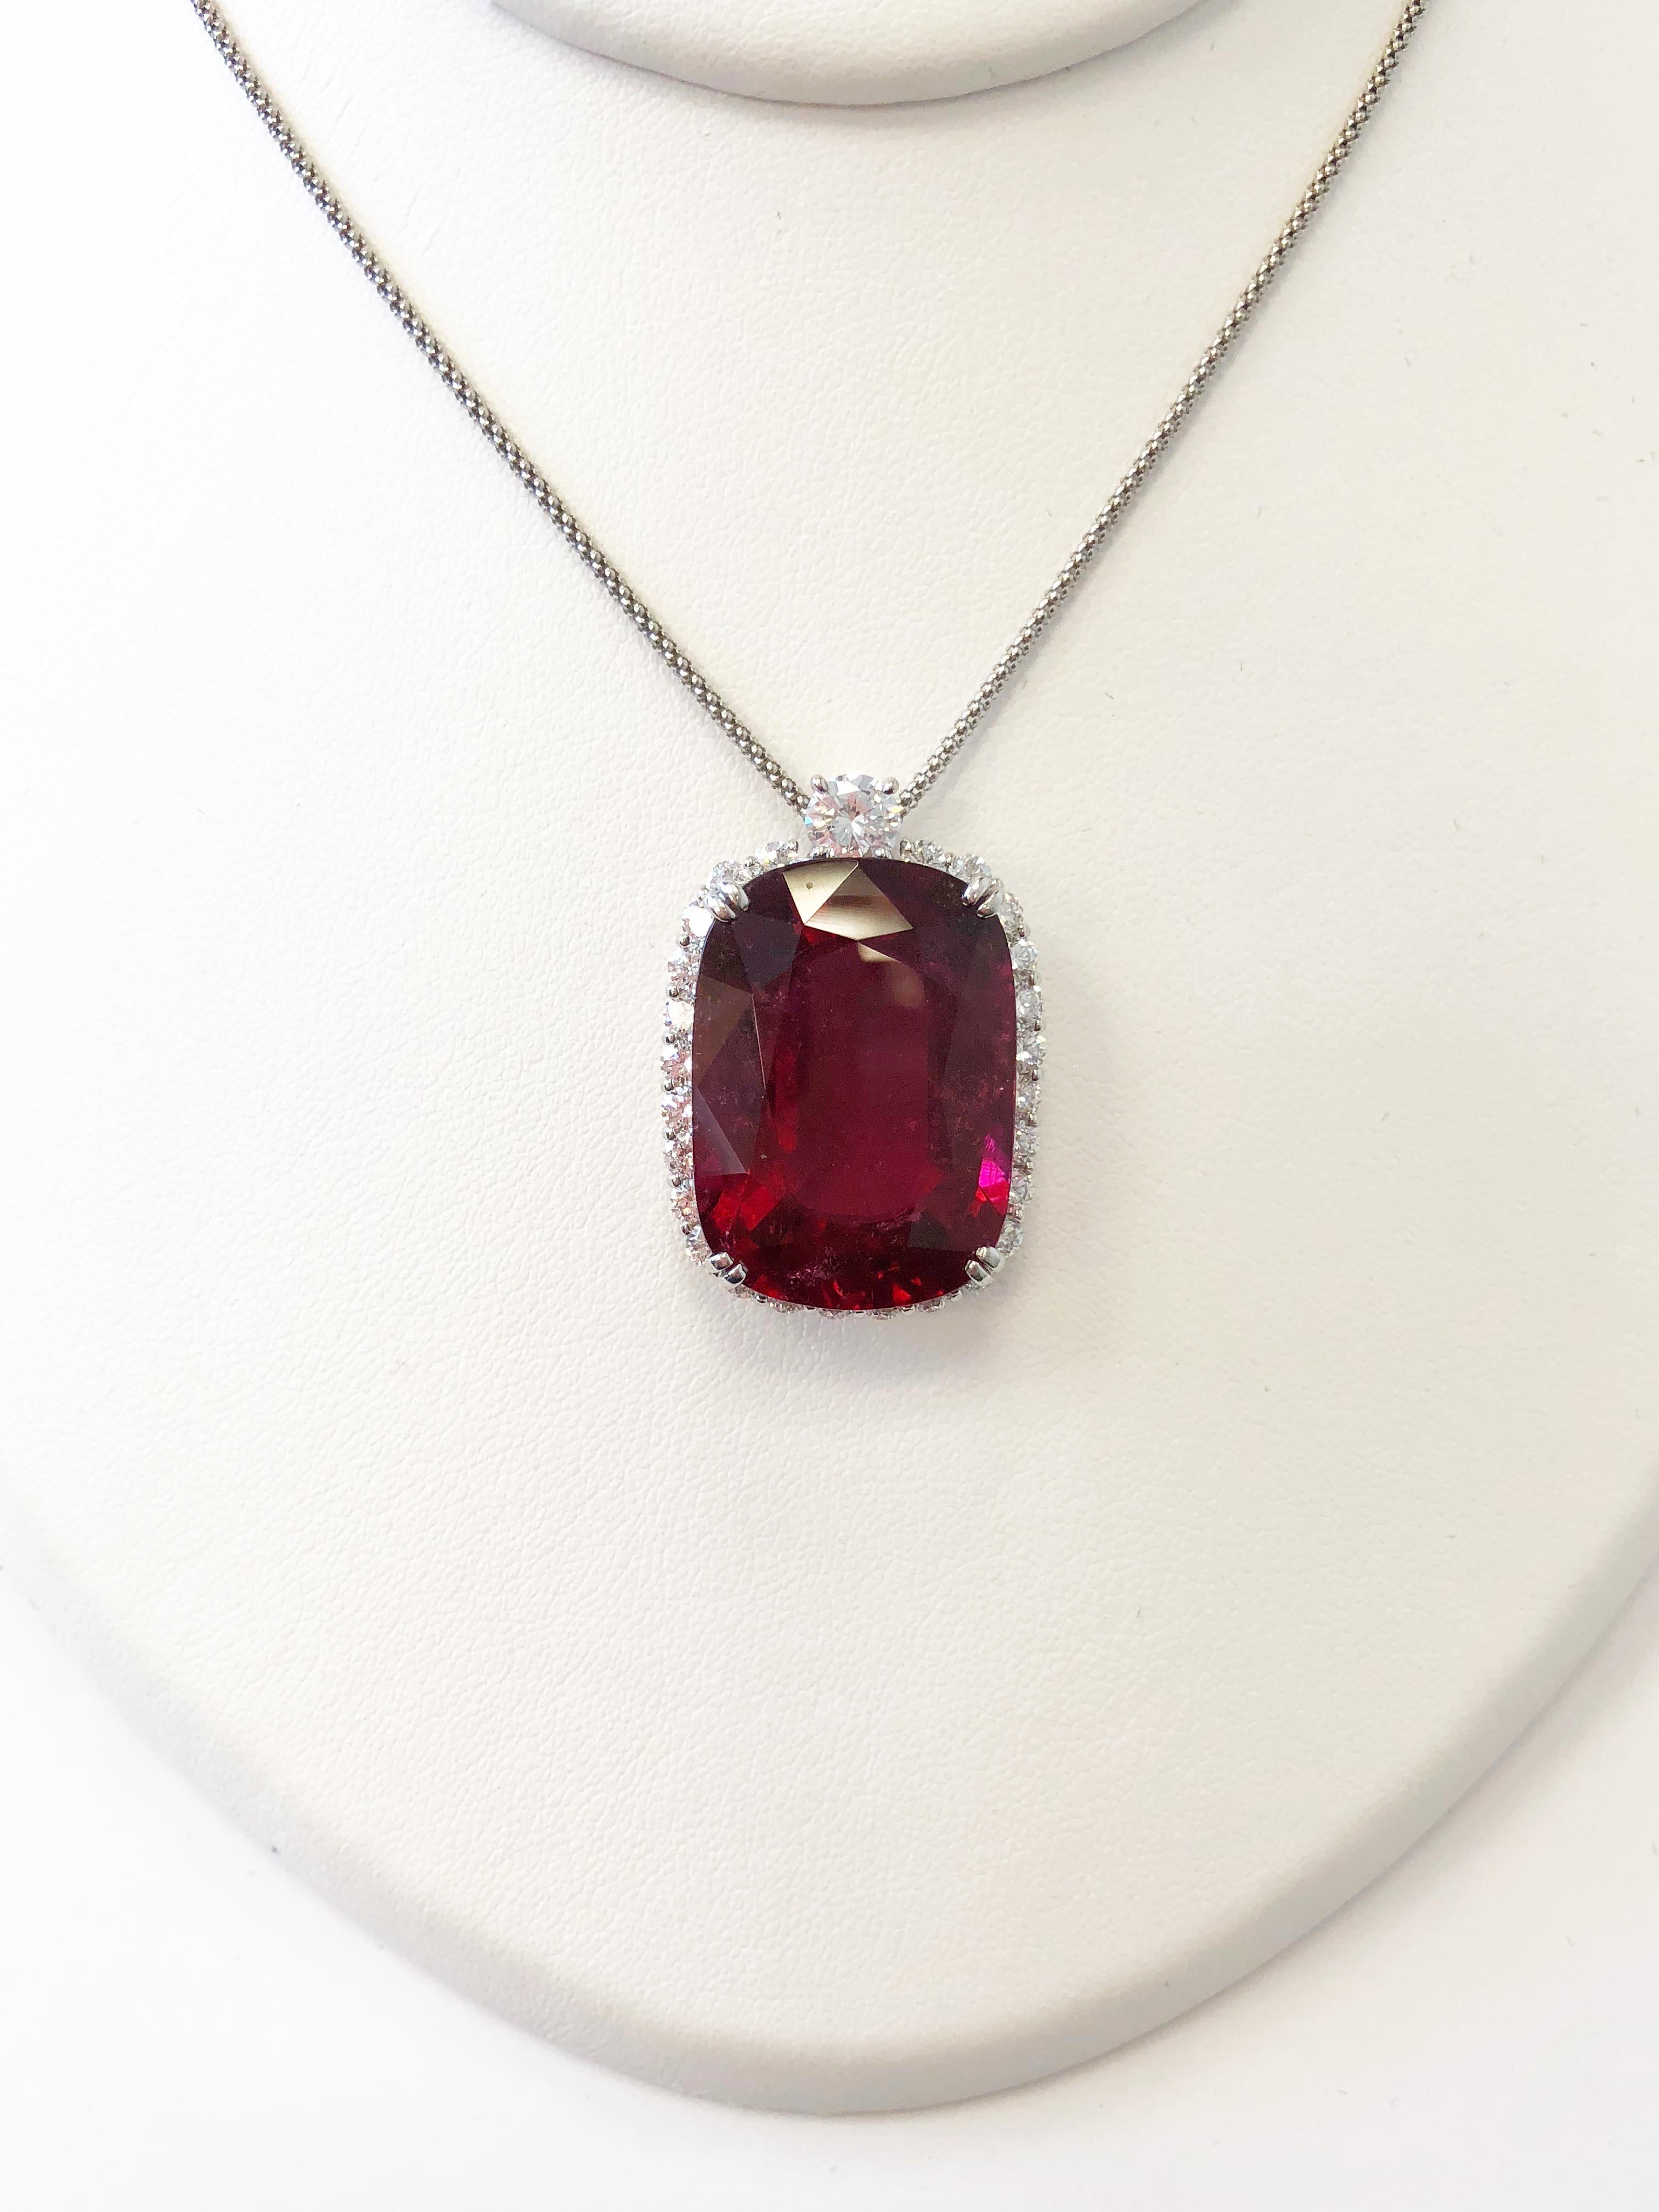 Gorgeous deep red 40.83 carat rubellite cushion surrounded by 2.57 carats of bright white clean diamond rounds in a handcrafted platinum mounting.  Length is 20